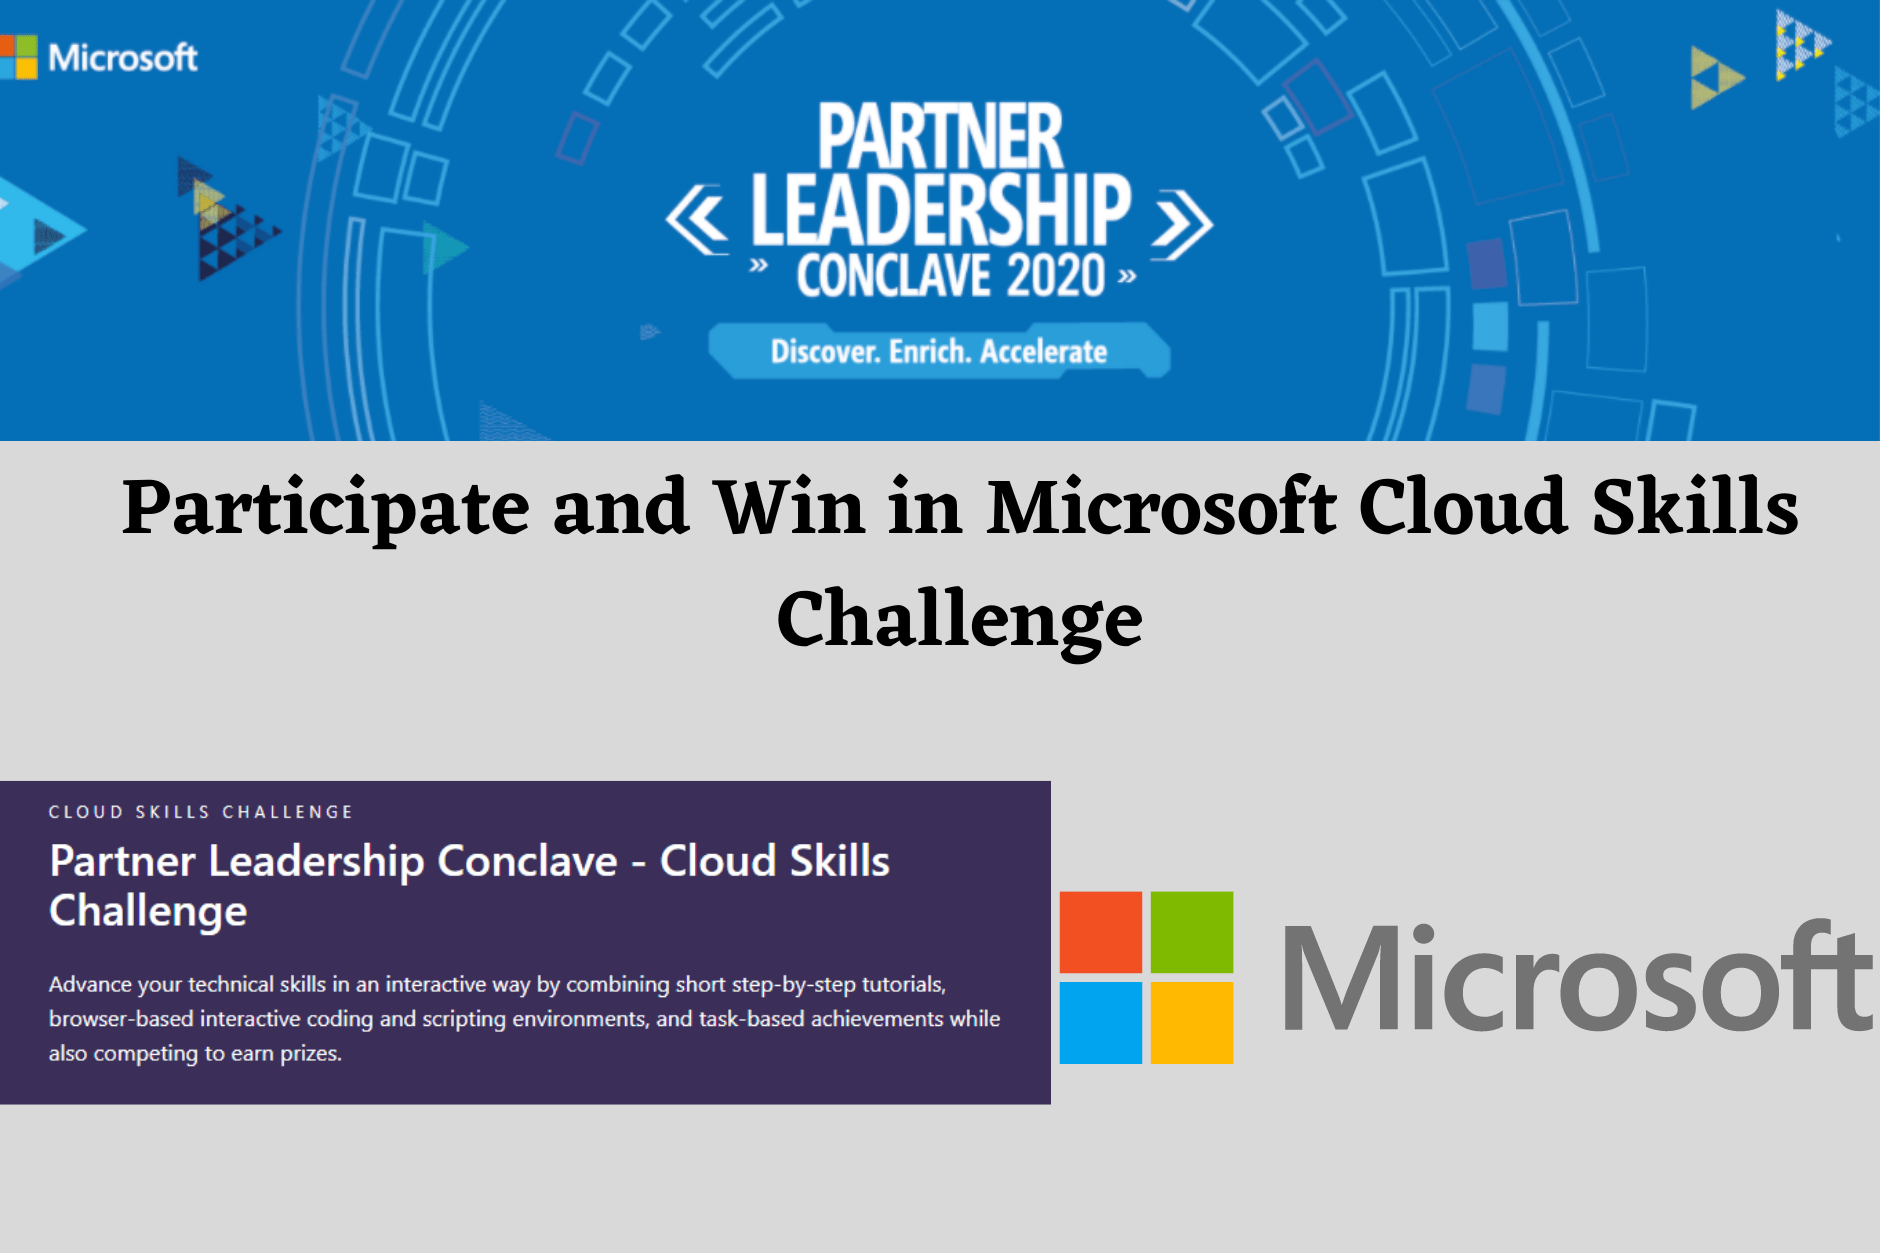 Participate and Win in Microsoft Cloud Skills Challenge